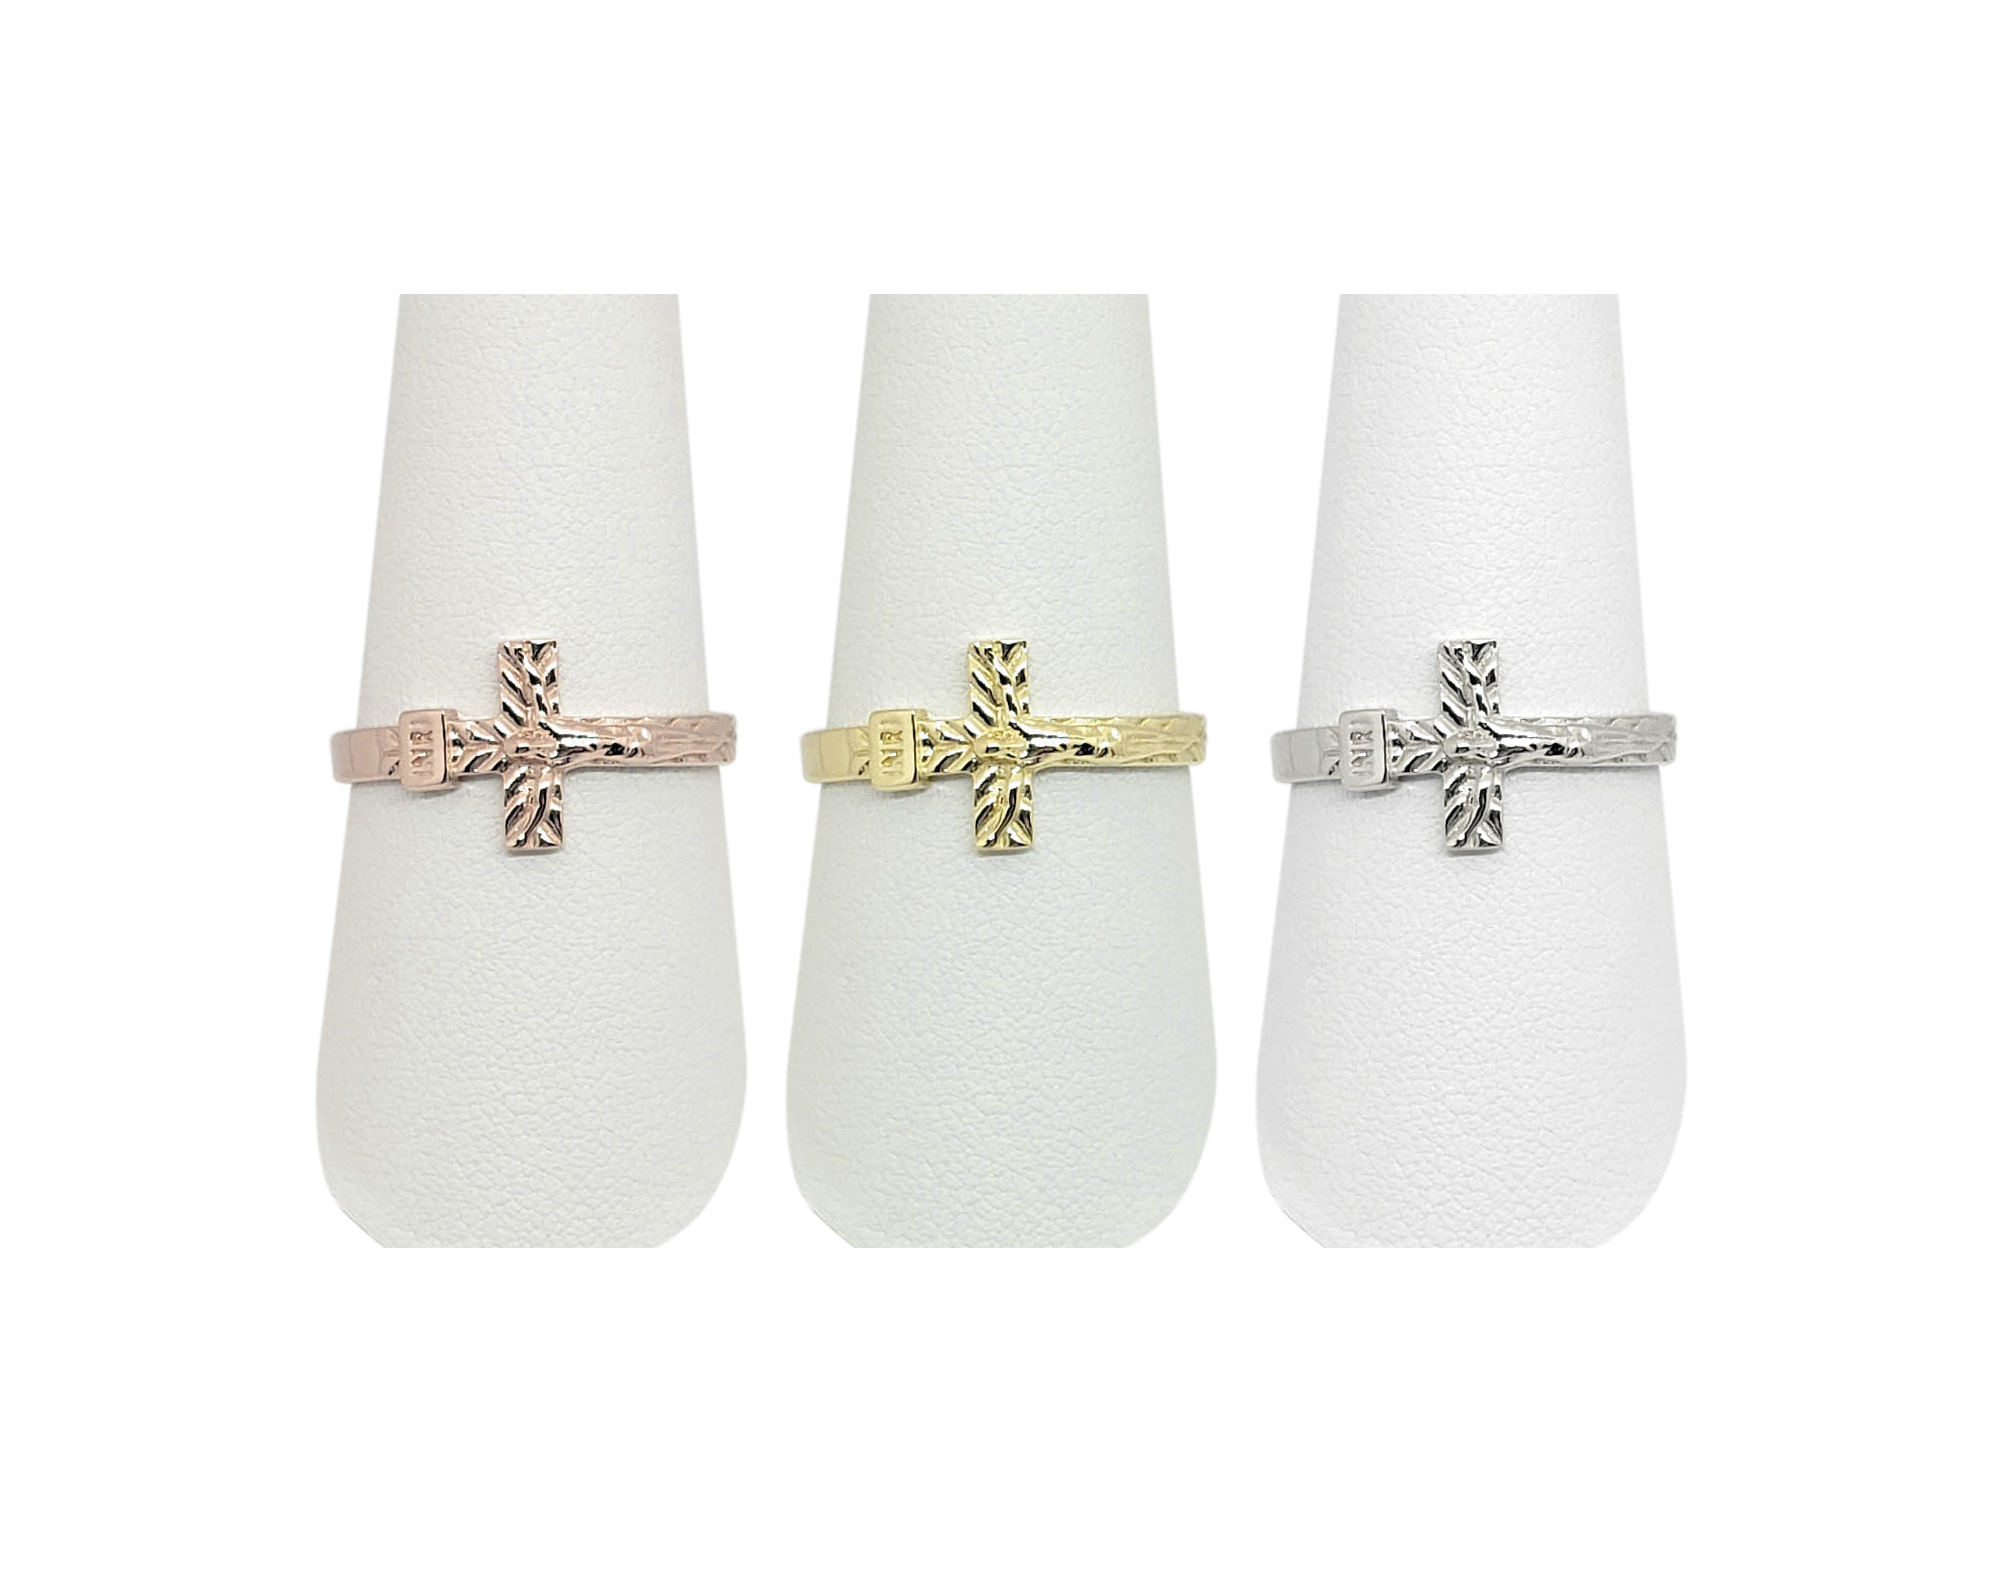 Voeding Expertise Idioot Solid 18K Yellow White or Rose Gold Crucifix Ring, INRI Jesus Cross Ring,  Sizes 3 - 12 - Jahda Jewelry Company Custom Gold Rings, Necklaces,  Bracelets & Earrings - Sacramento, California